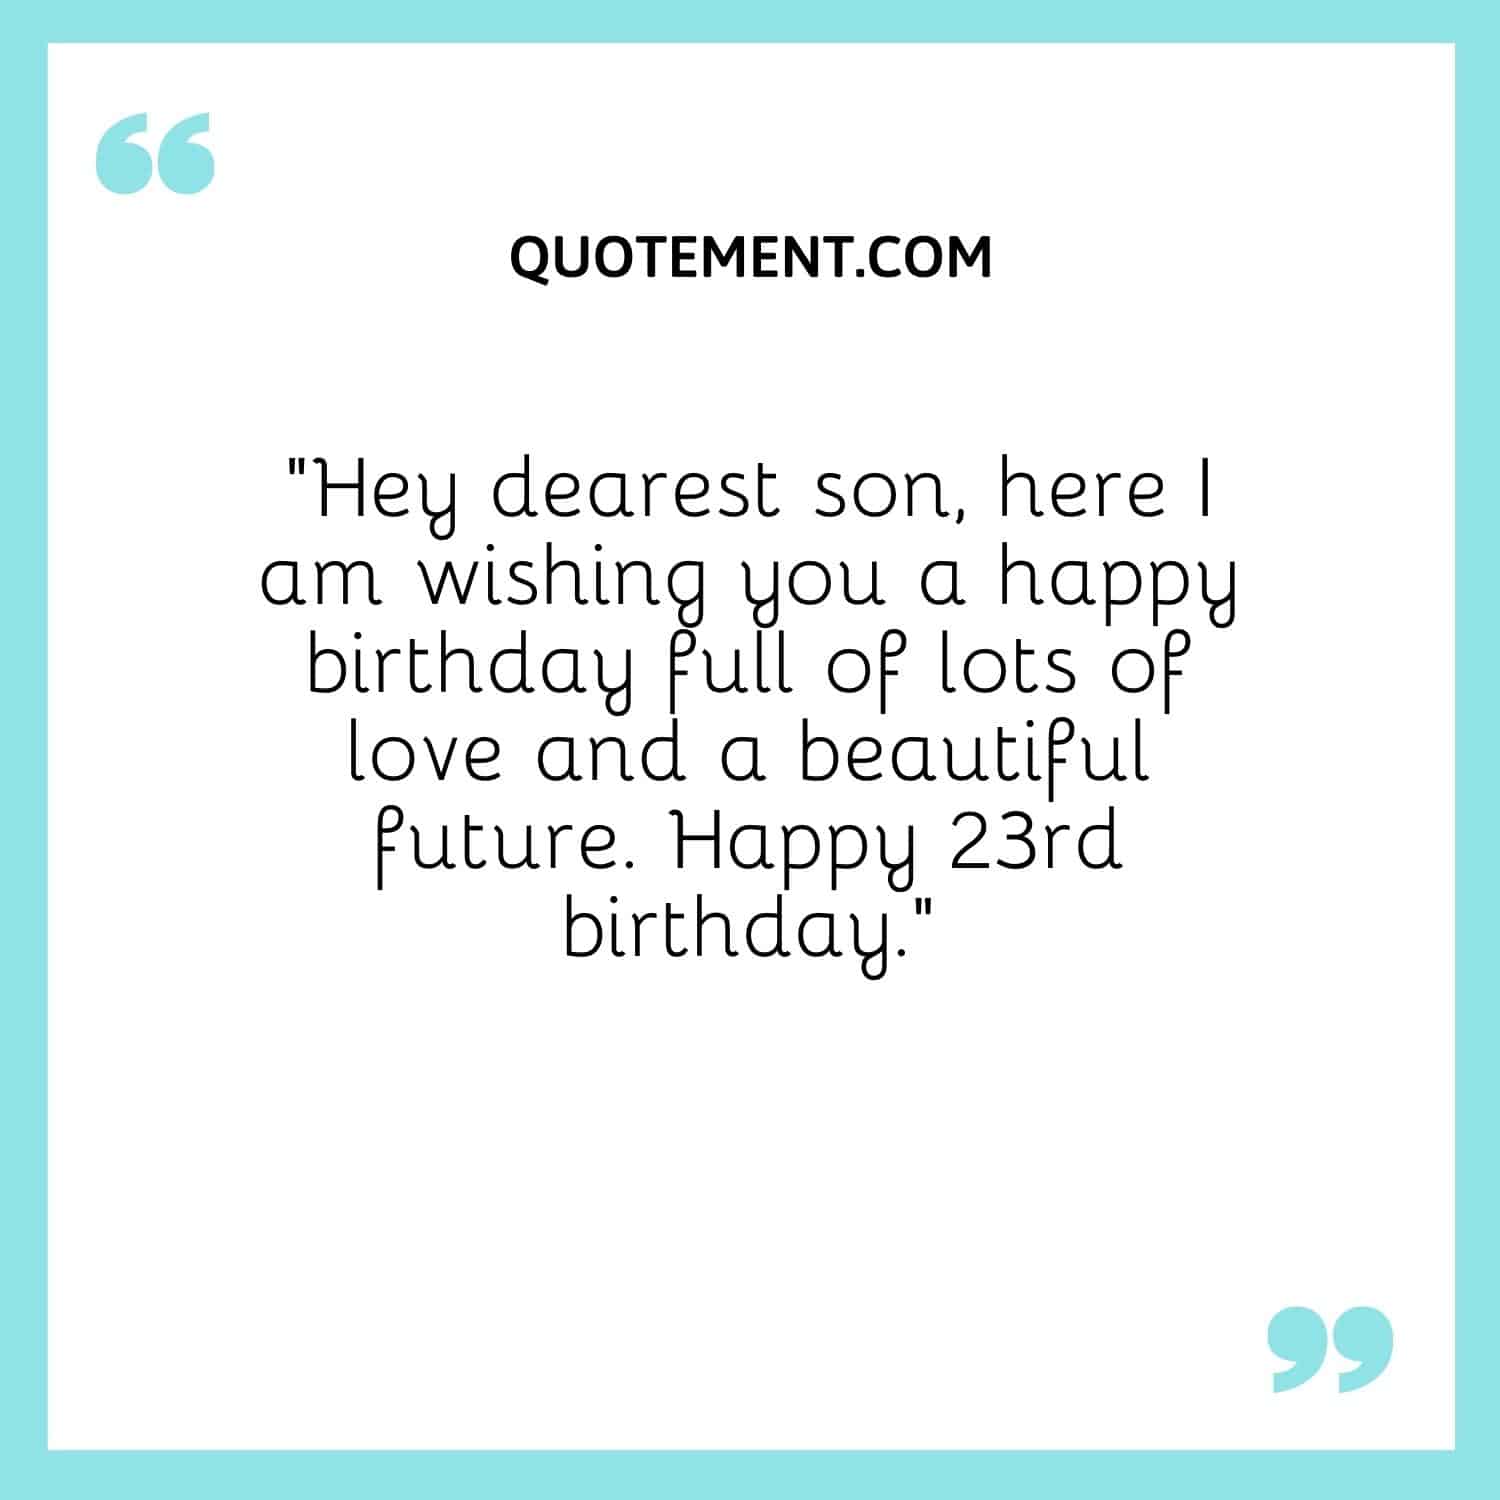 Hey dearest son, here I am wishing you a happy birthday full of lots of love and a beautiful future